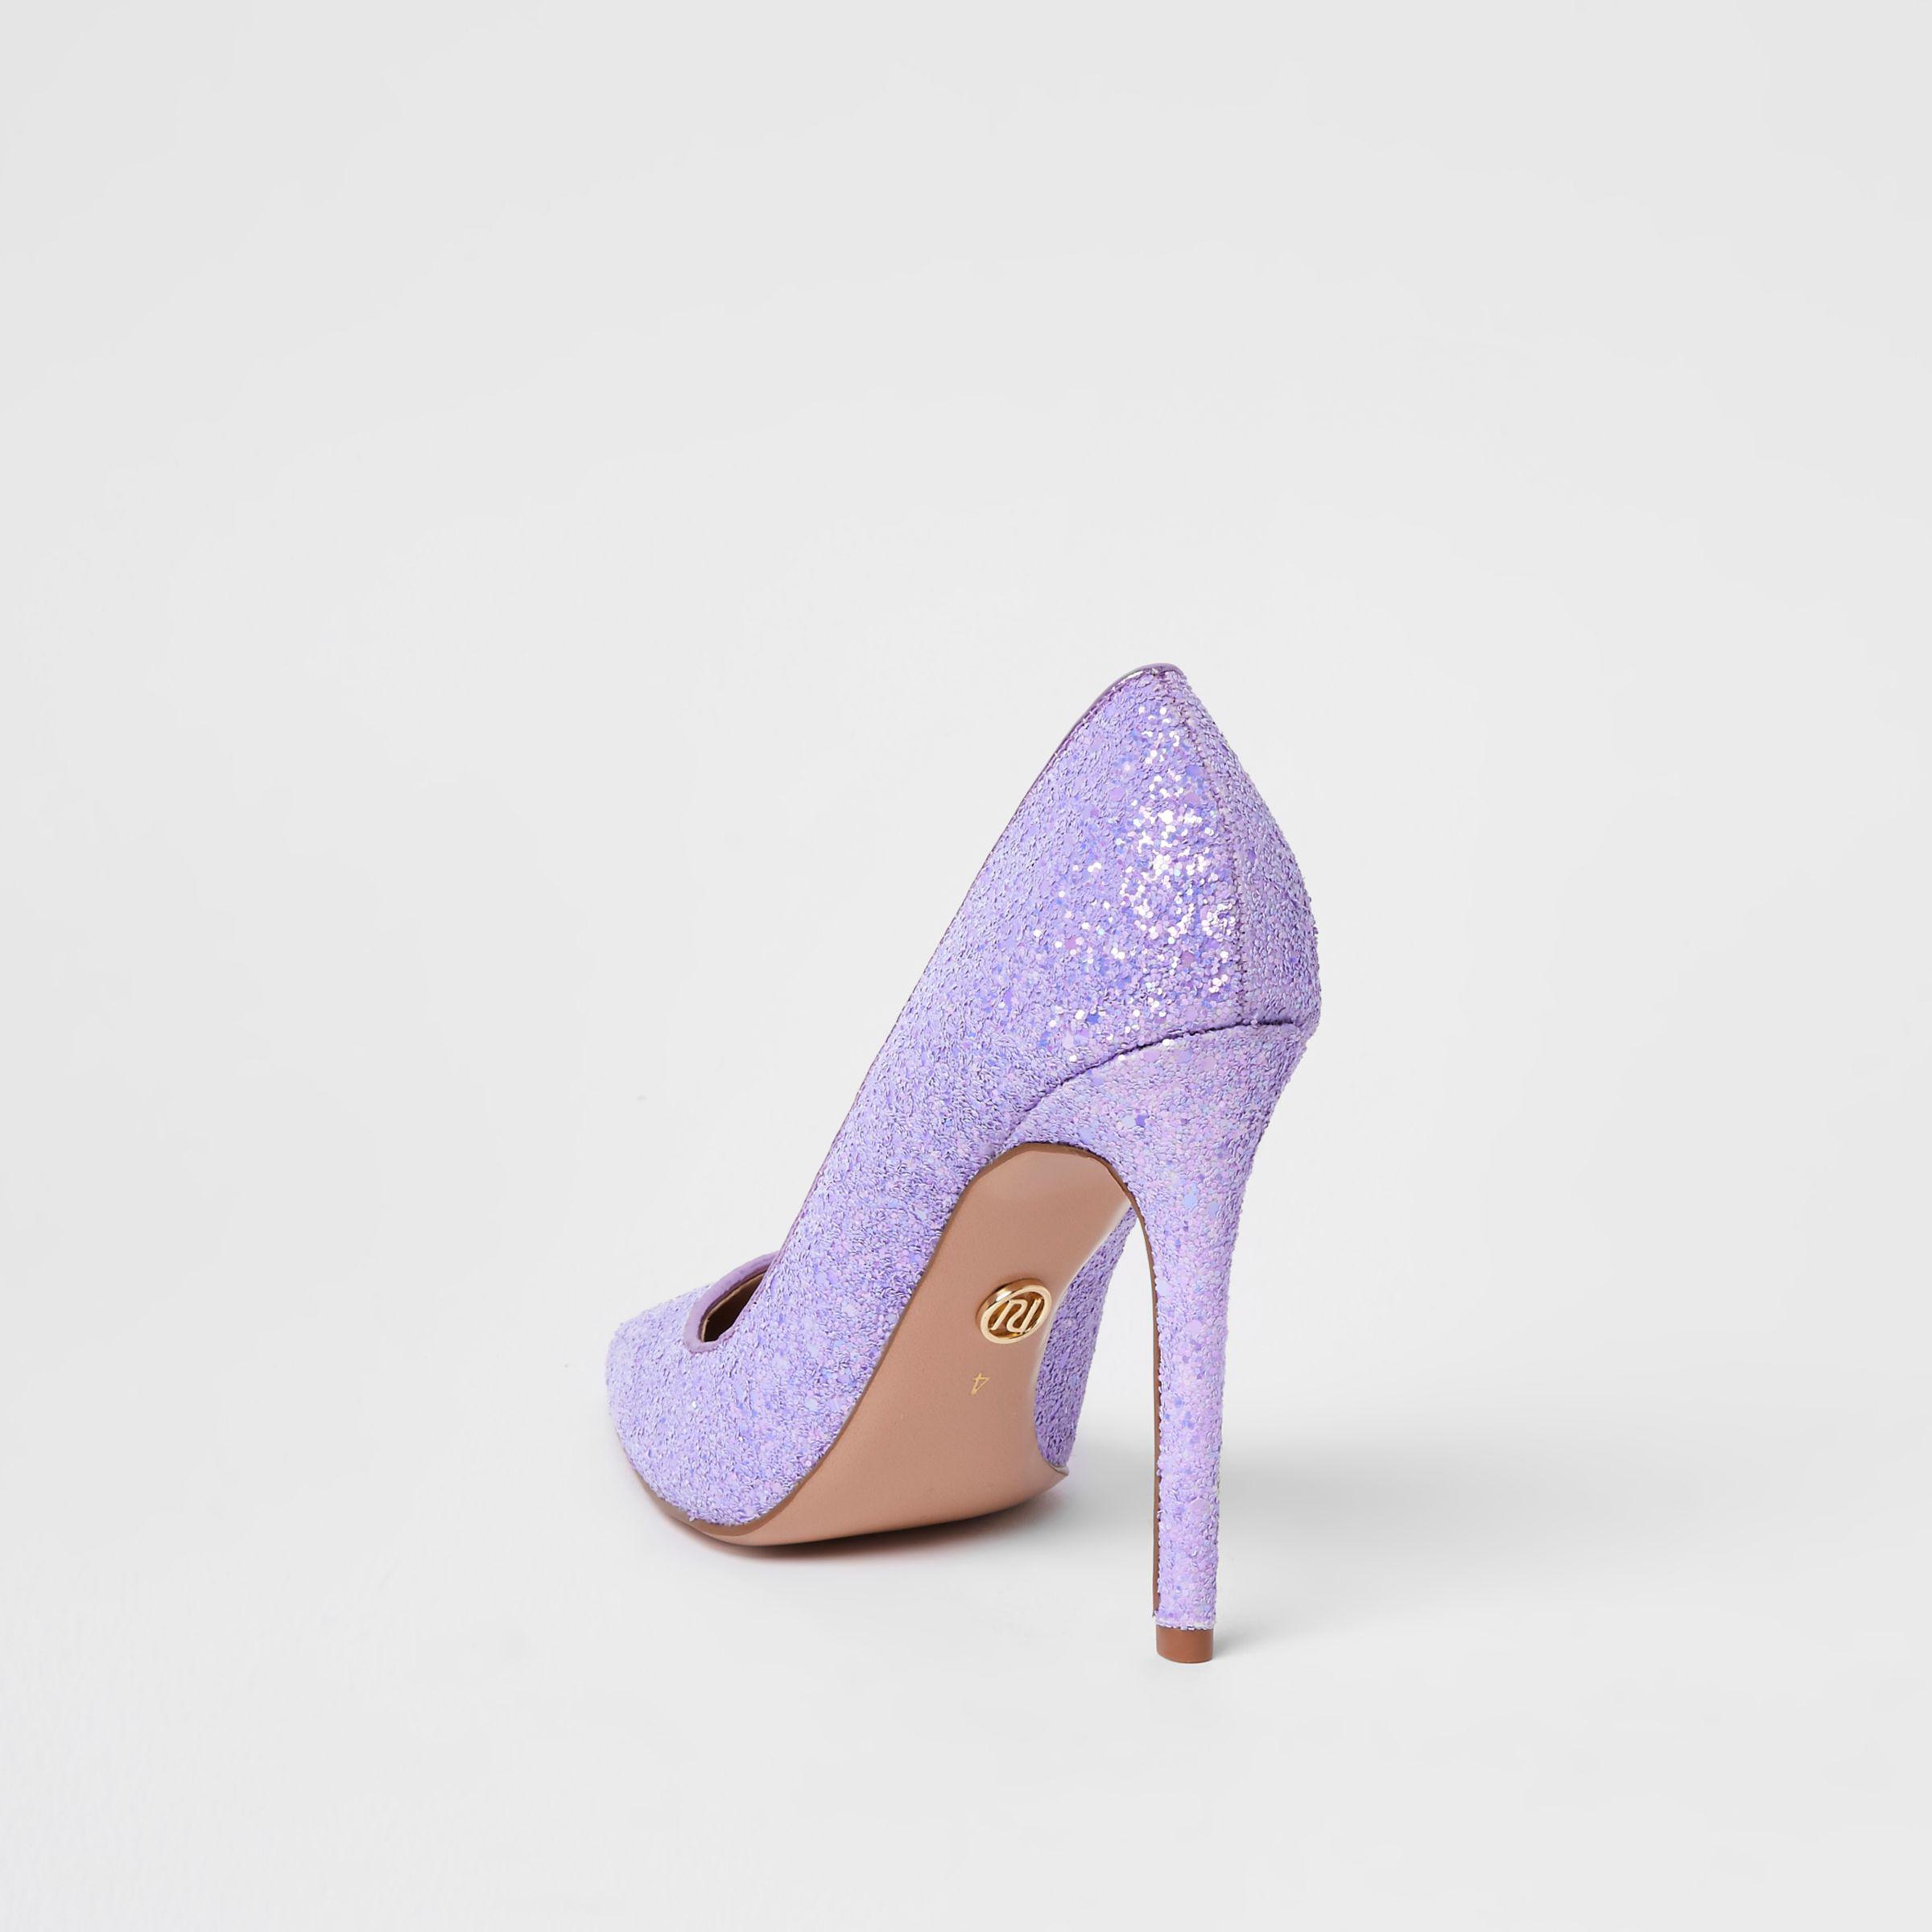 River Island Glitter Court Shoes in 